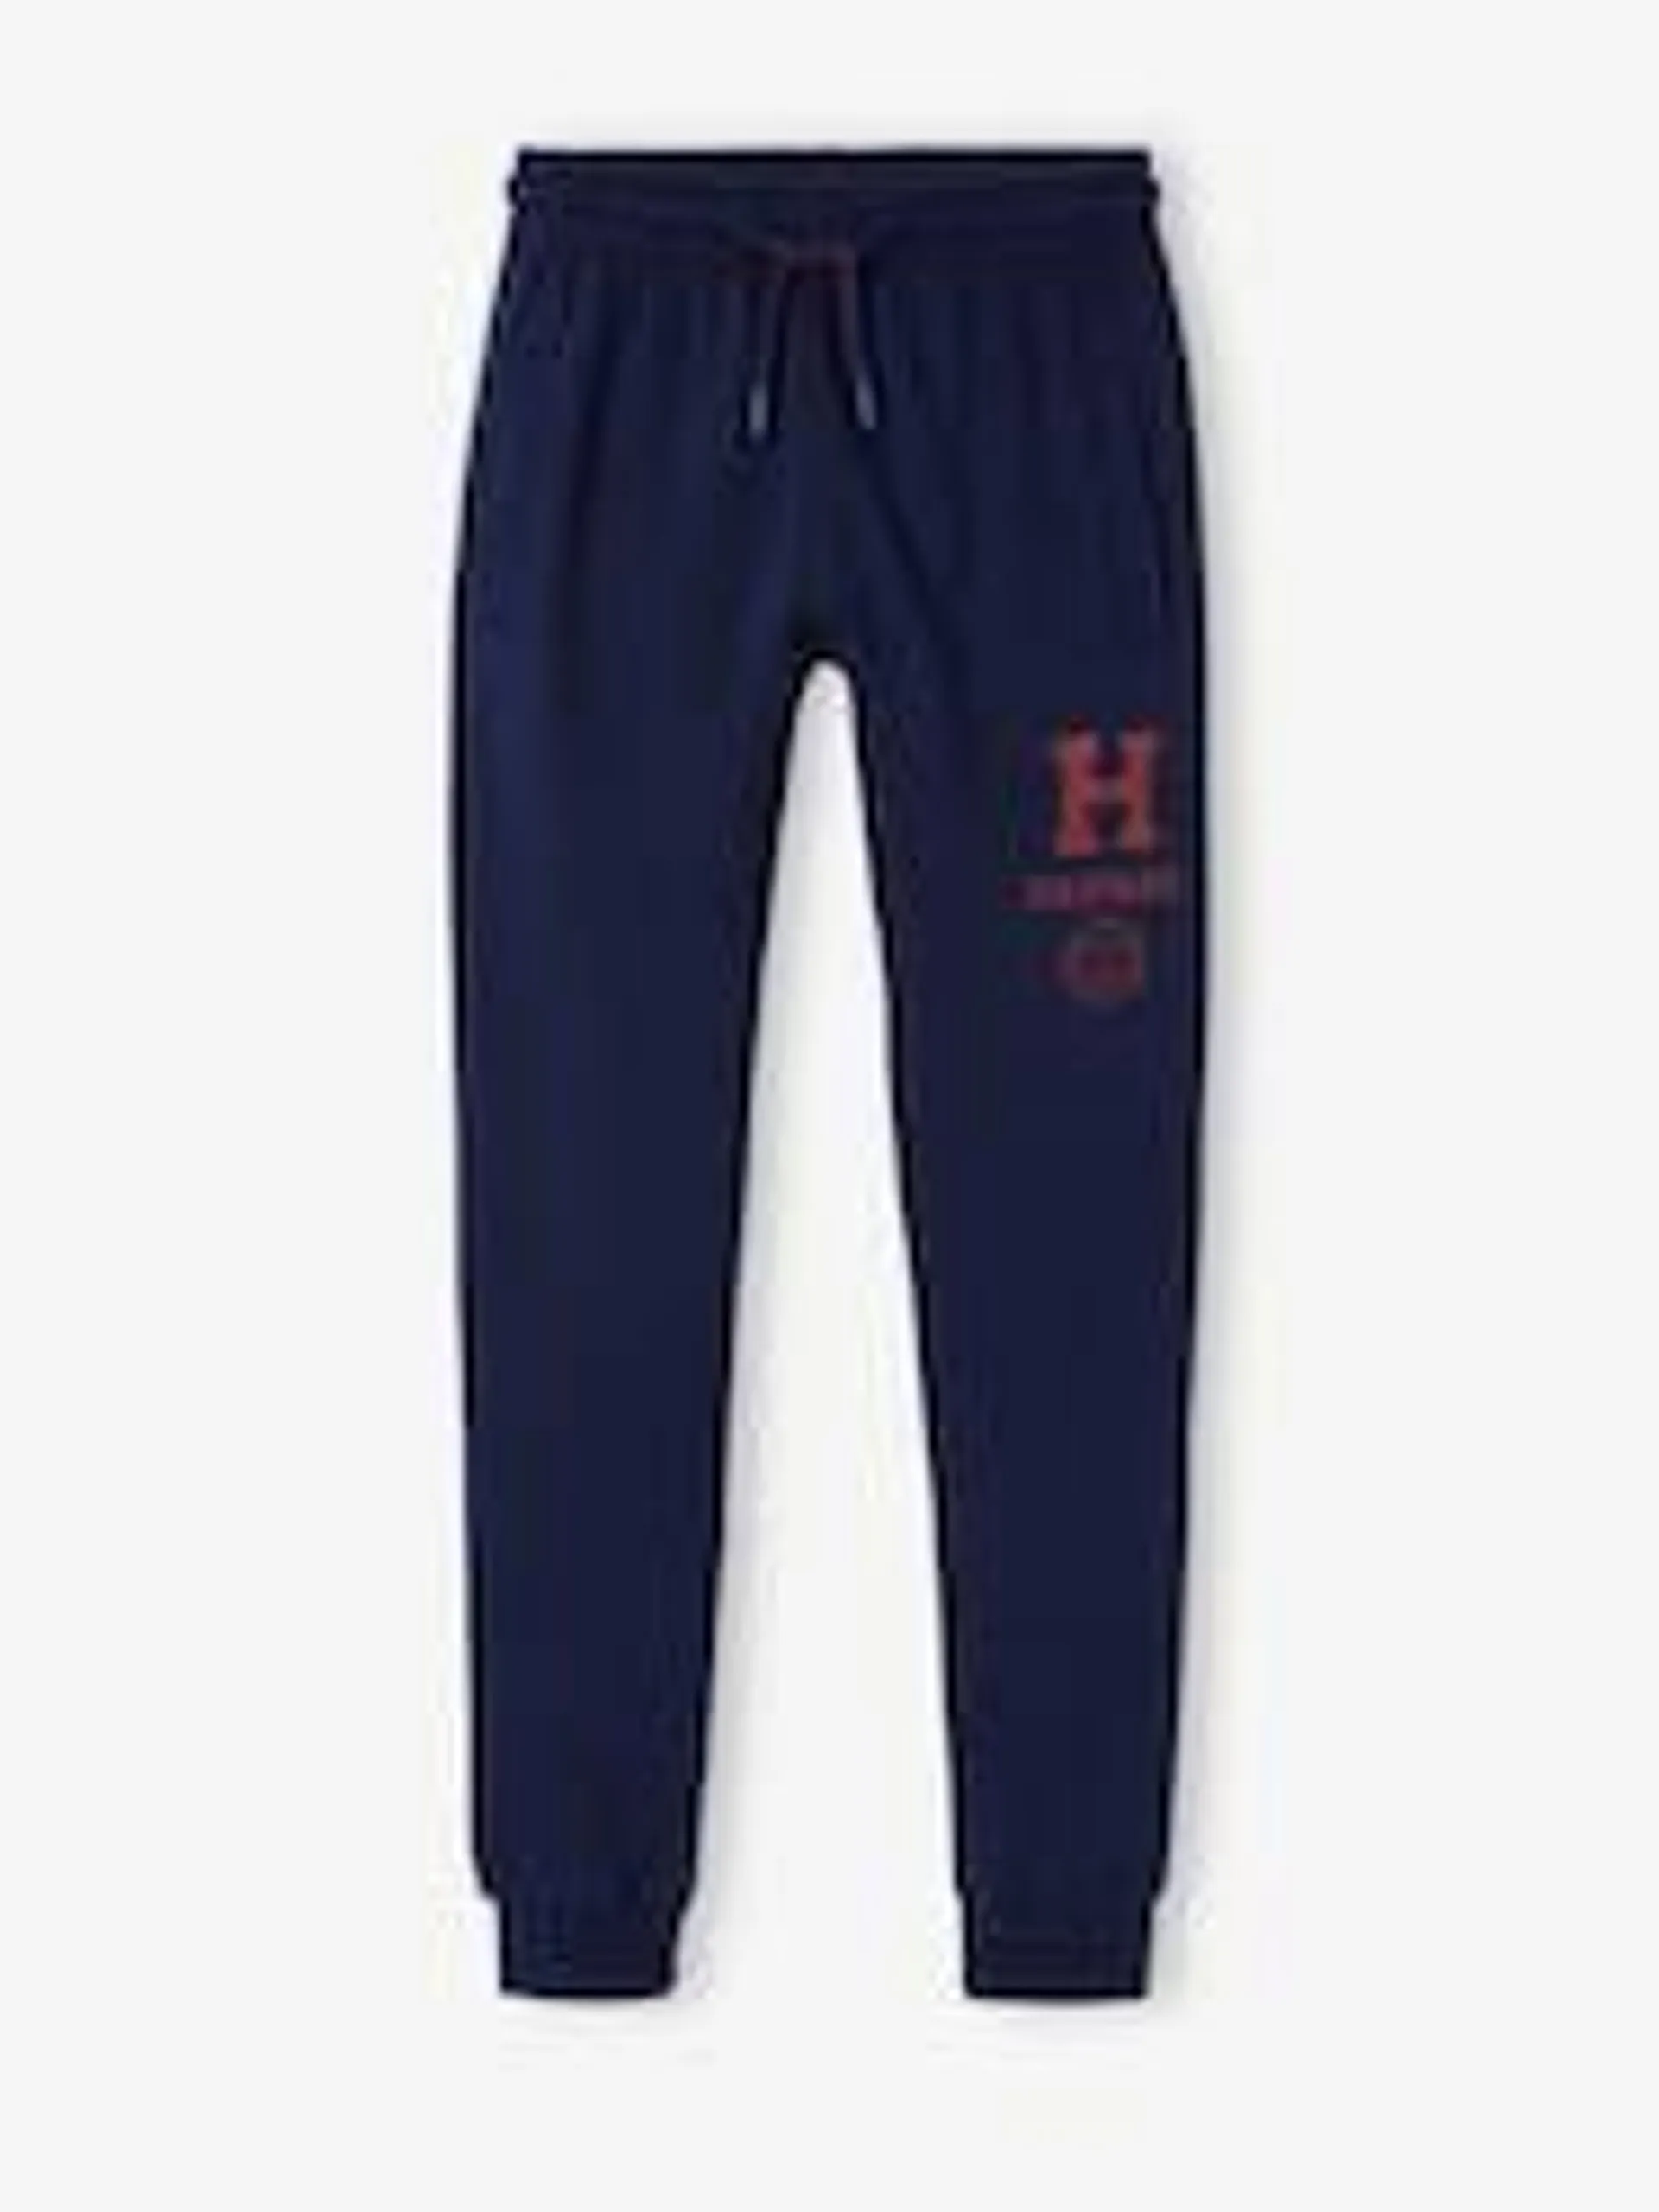 Harvard® Sports Bottoms for Boys - blue dark solid with...